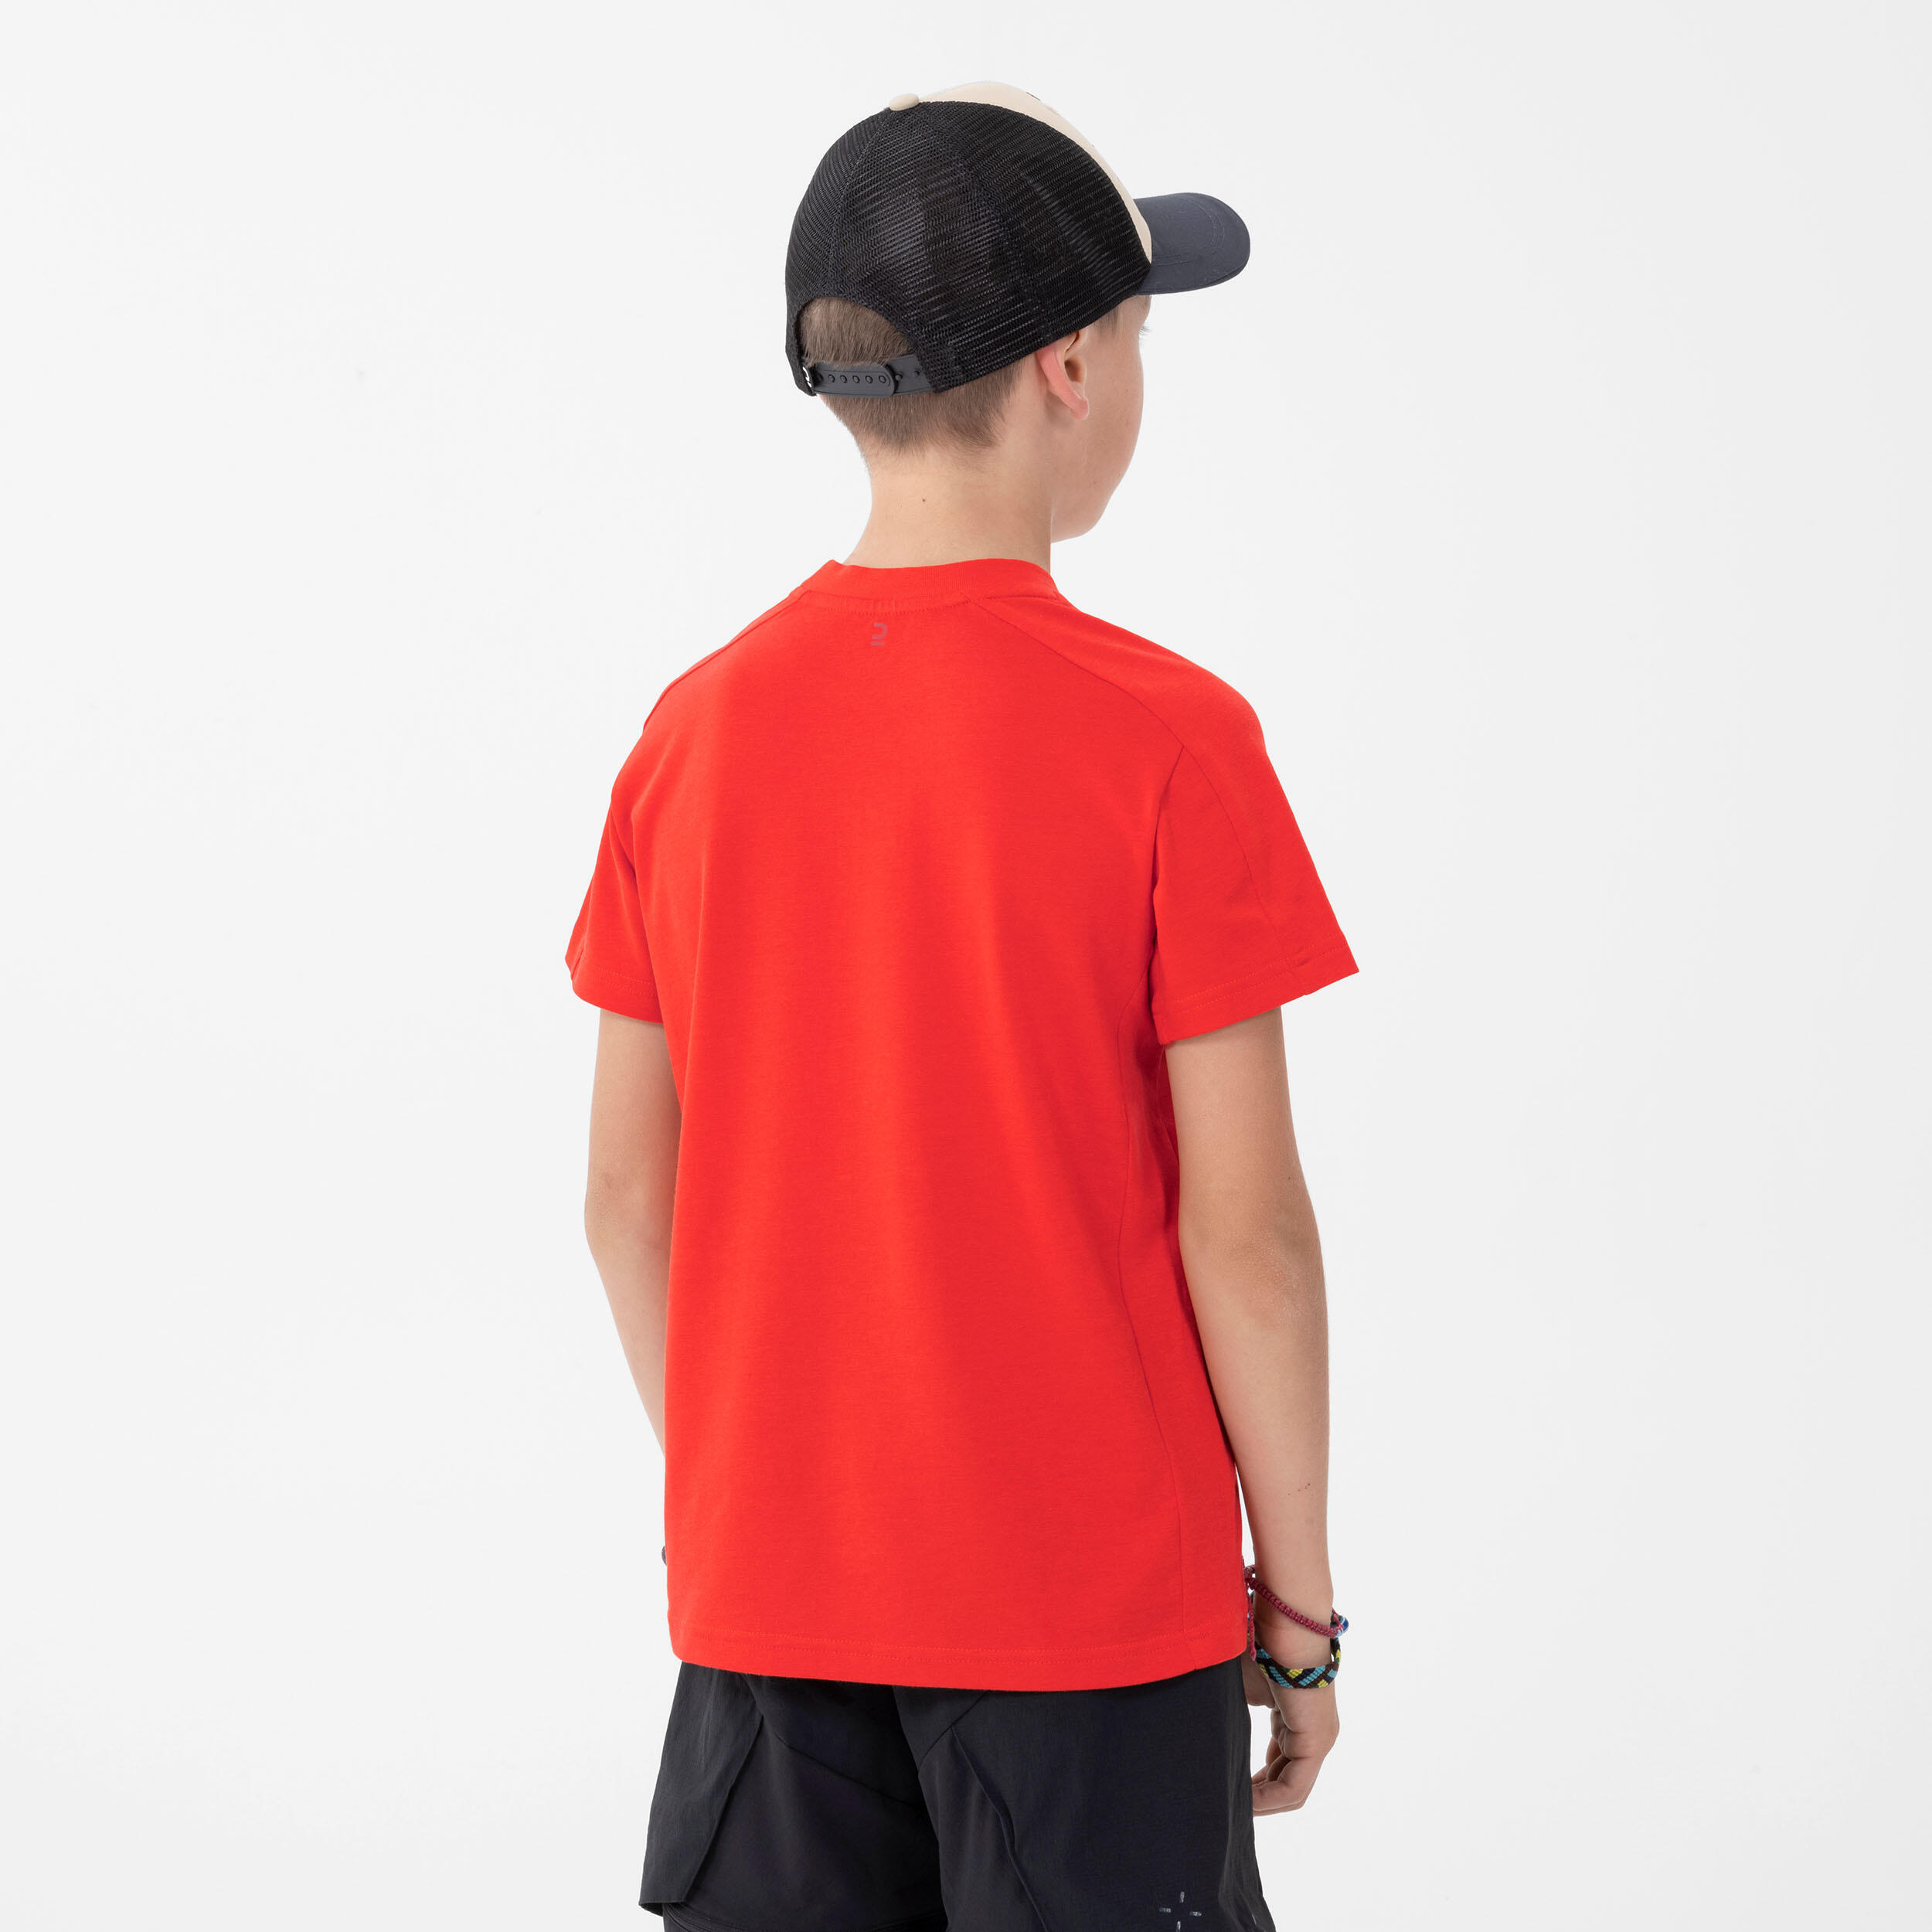 Kids' Hiking T-Shirt - MH100 Aged 7-15 - Red 4/6